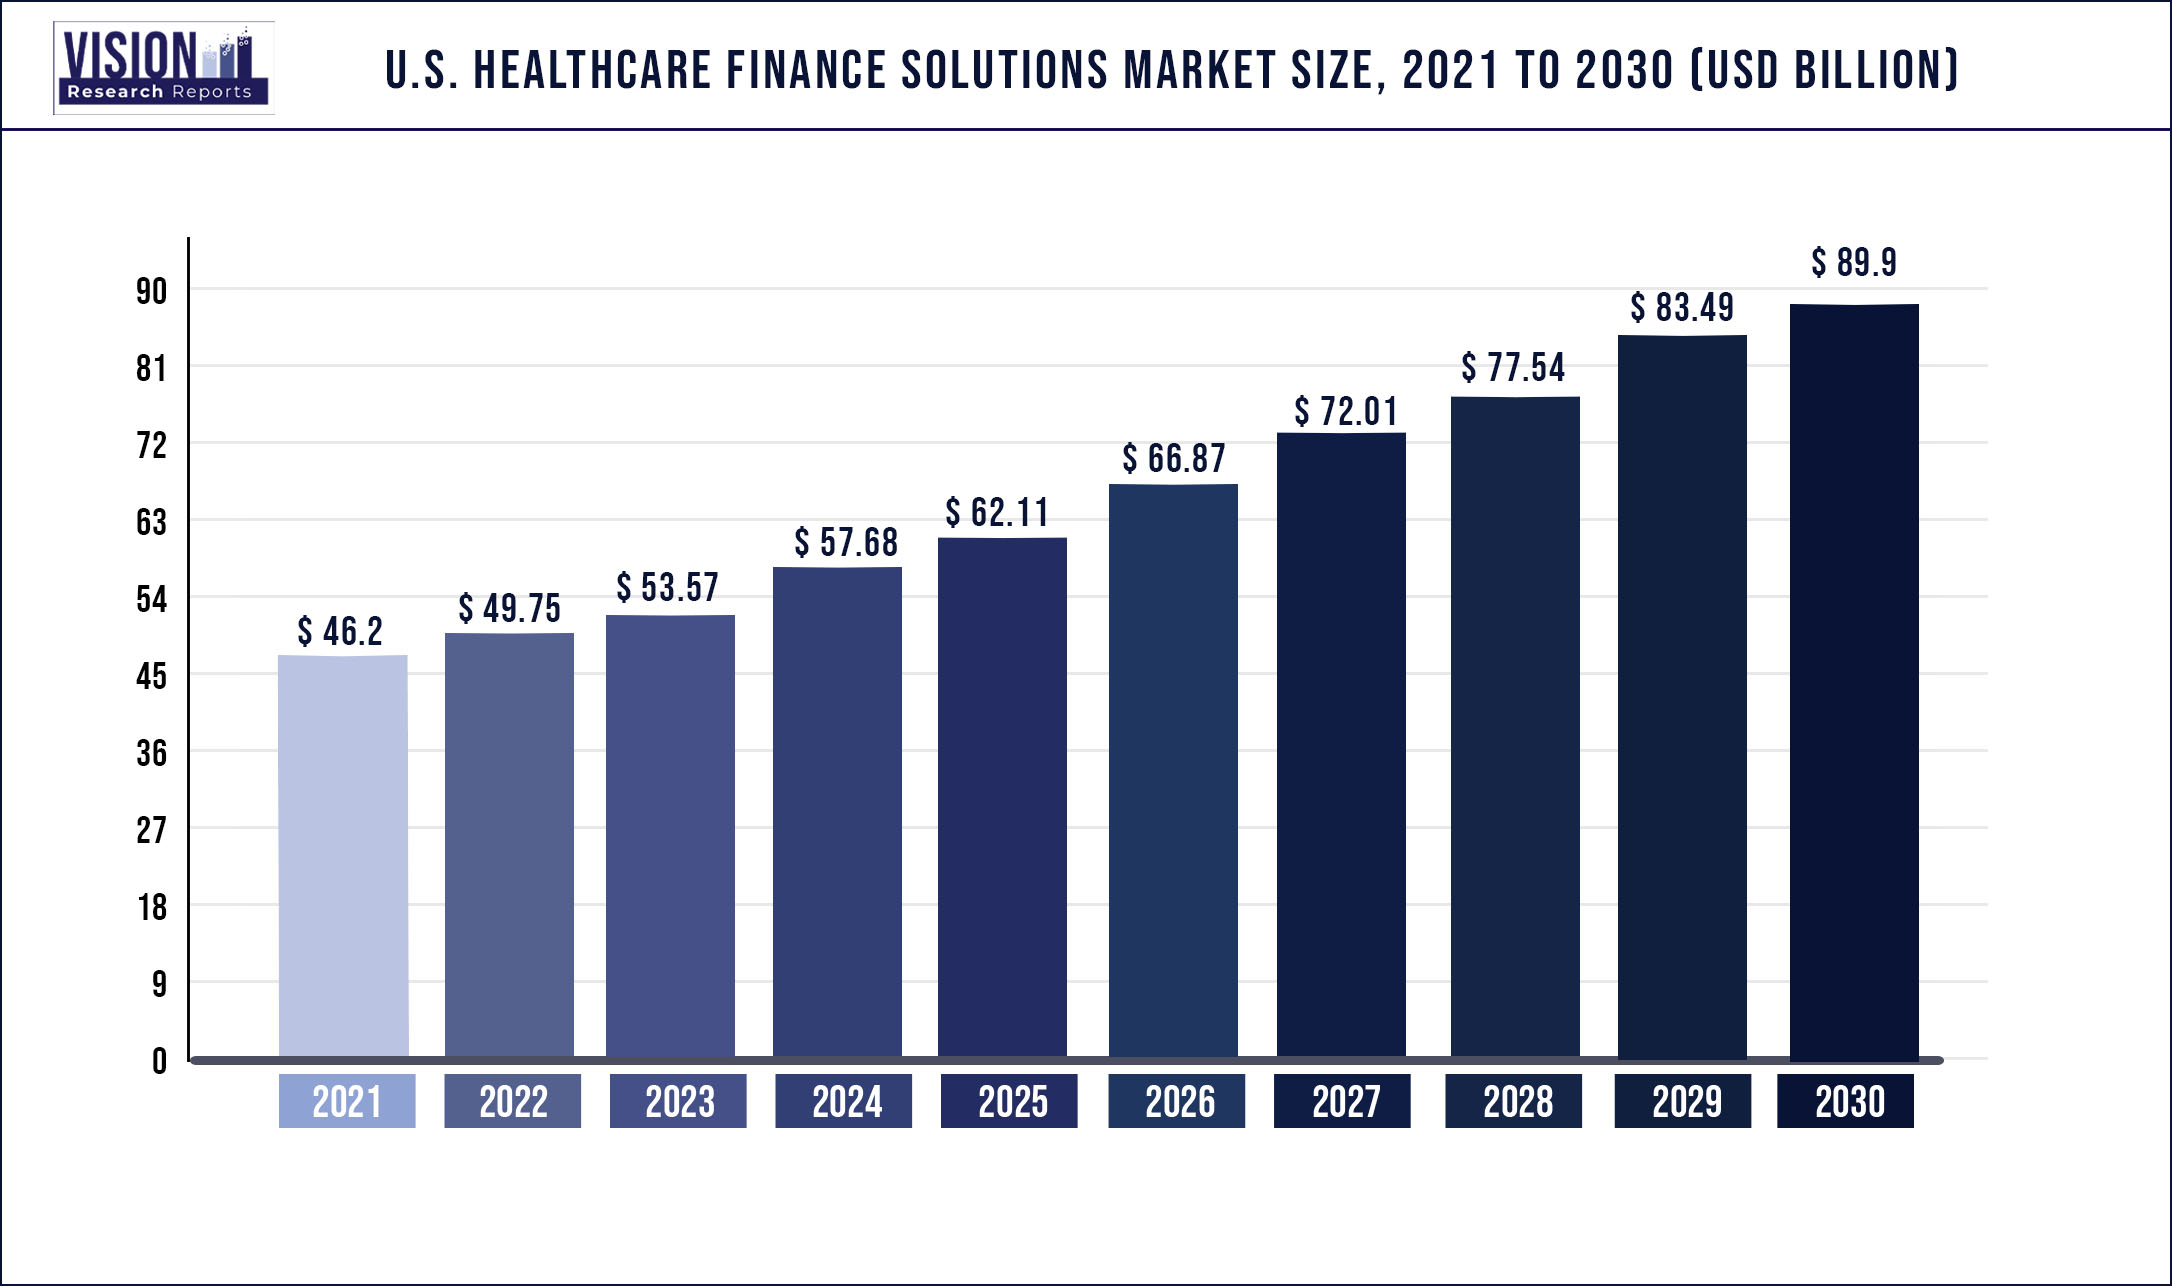 U.S. Healthcare Finance Solutions Market Size 2021 to 2030